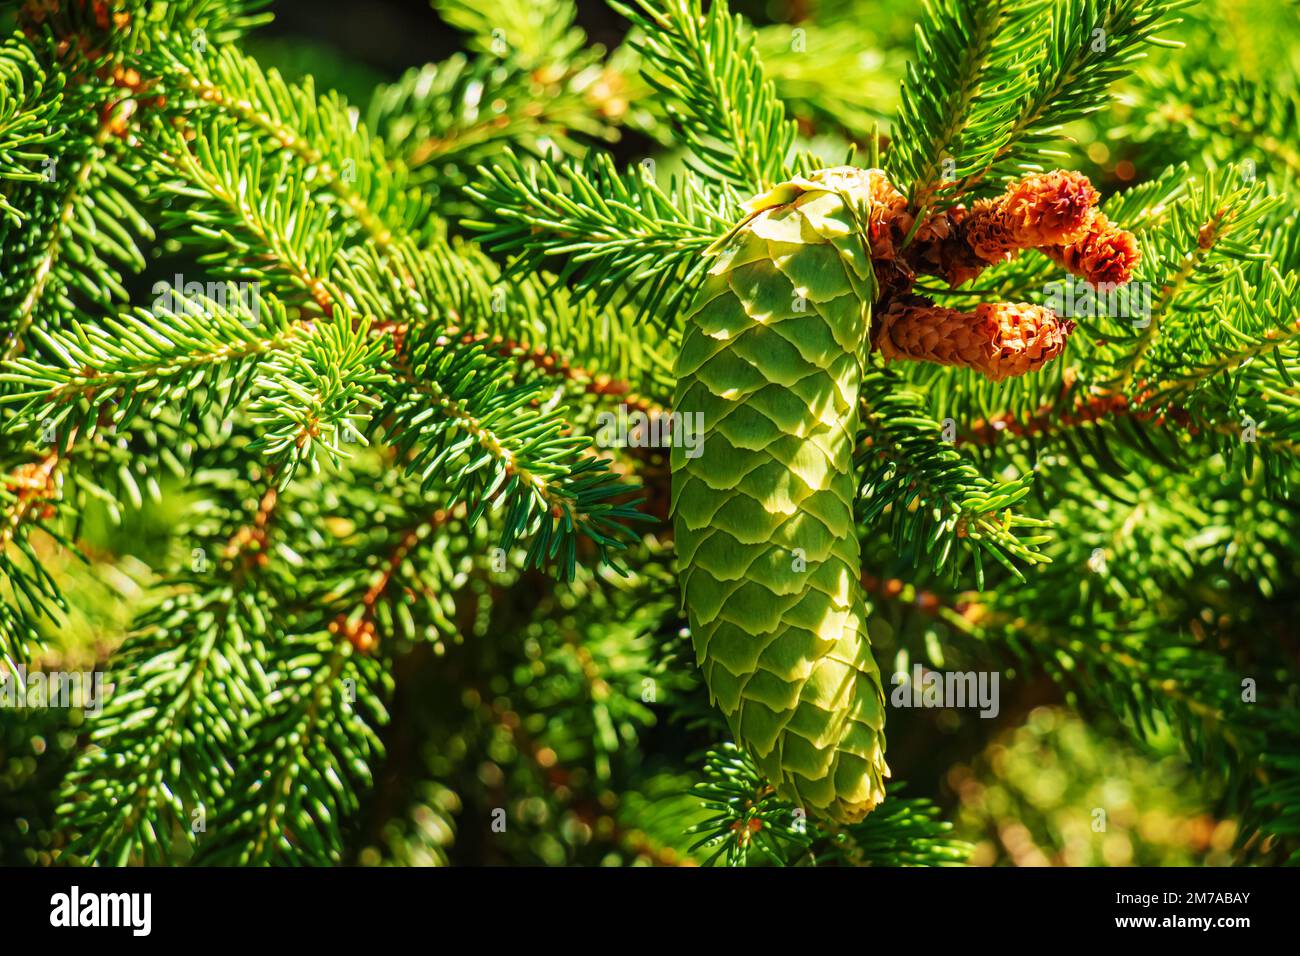 Big fresh green cone European spruce or Picea abies in Latin on the branches. Stock Photo